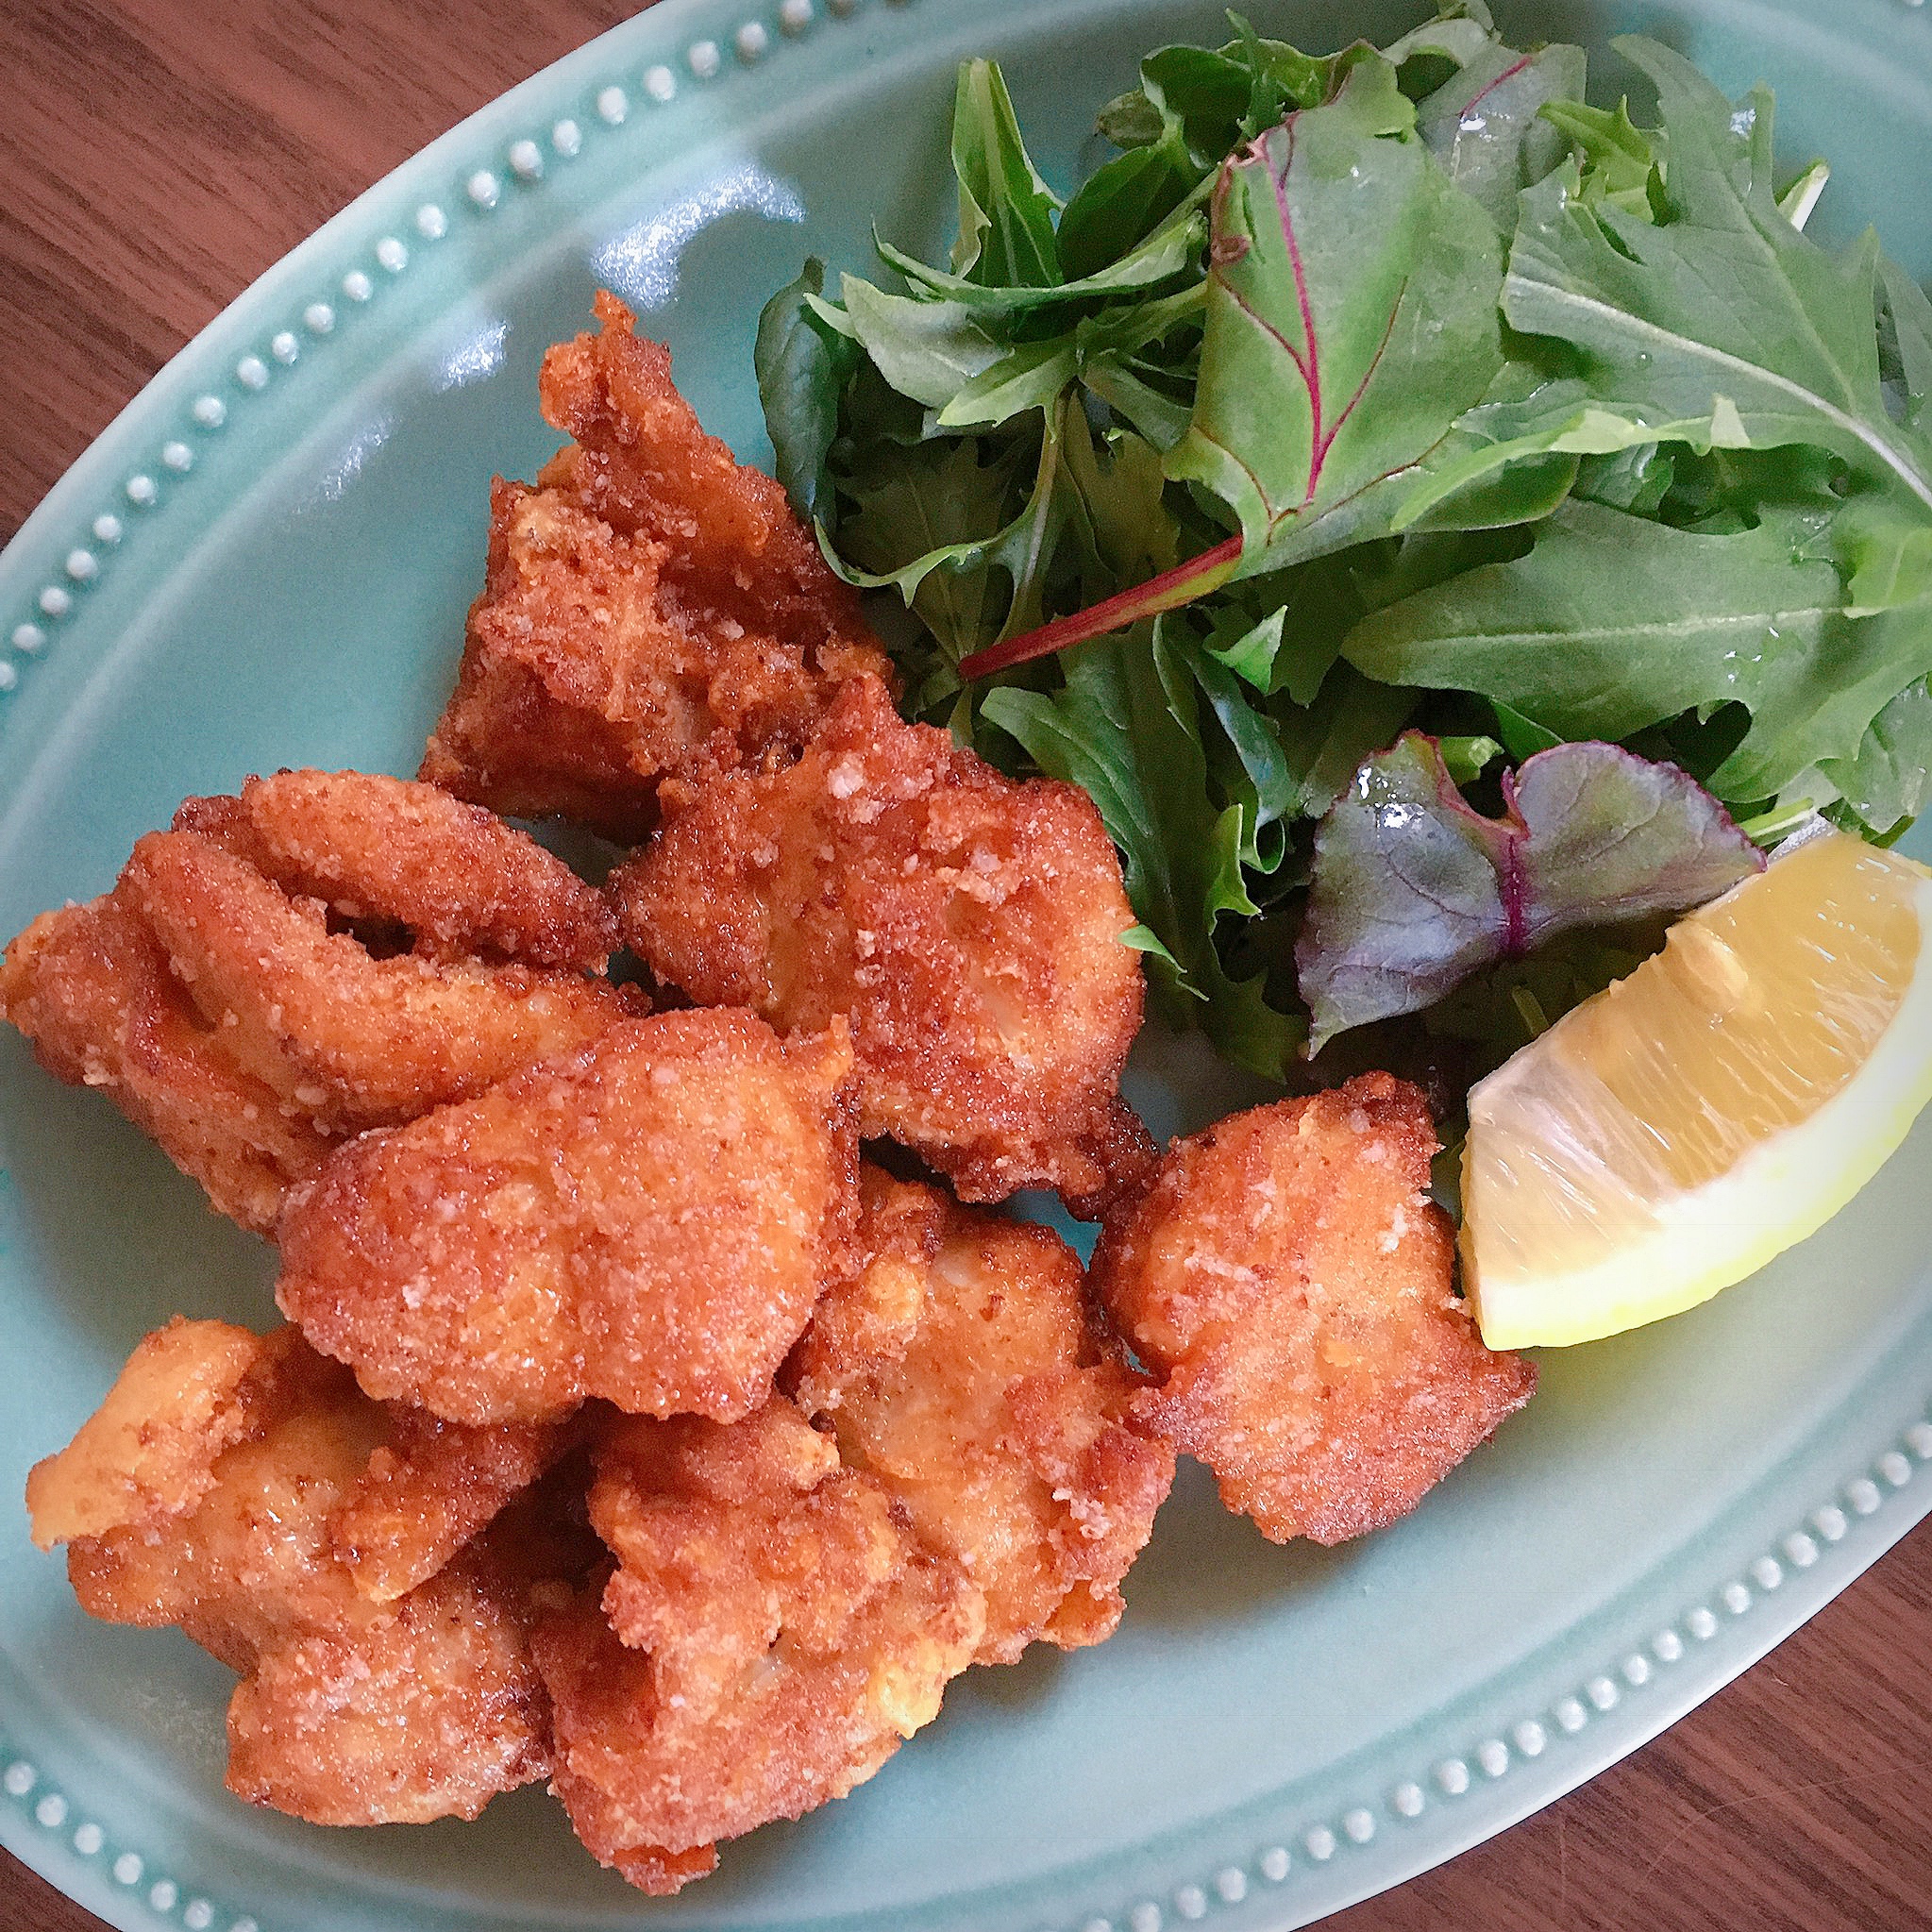 “Karaage” is a dish of chicken marinated in garlic and soy sauce and fried in oil.